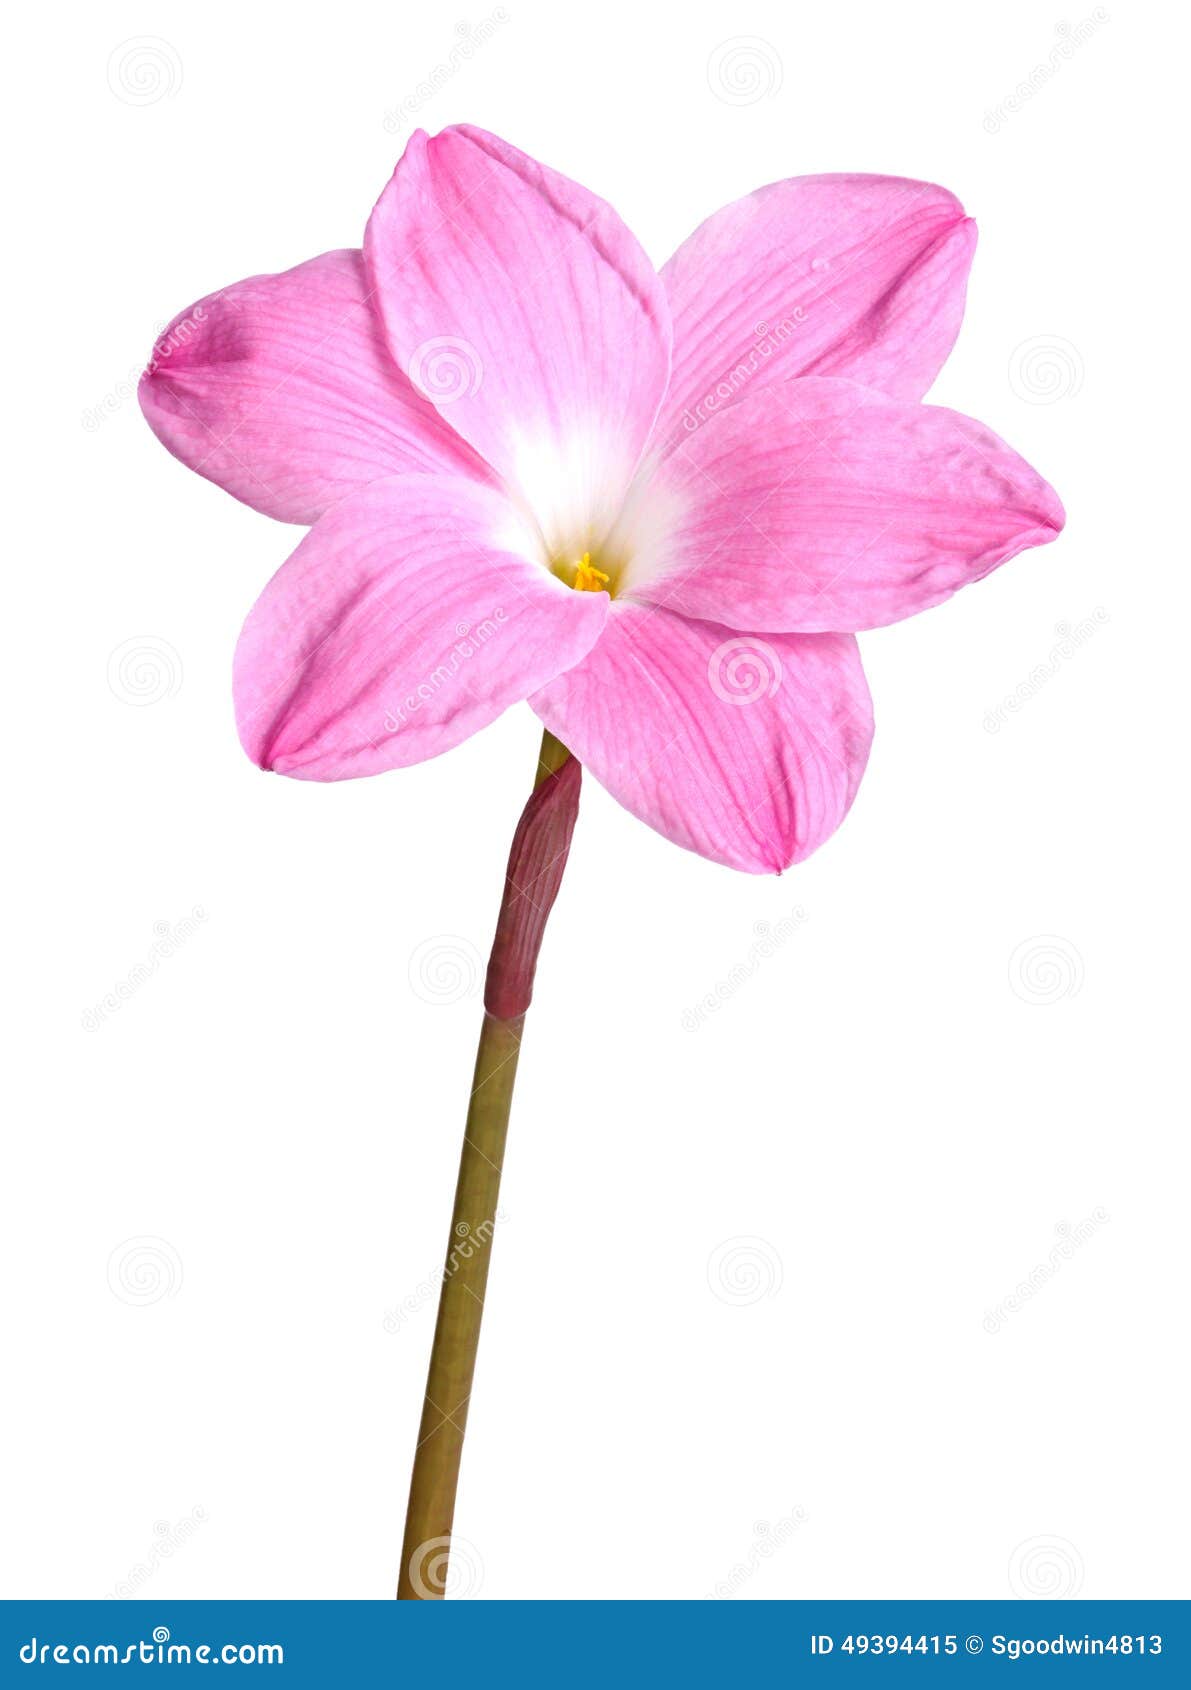 single pink flower of a zephyranthes cultivar  against w